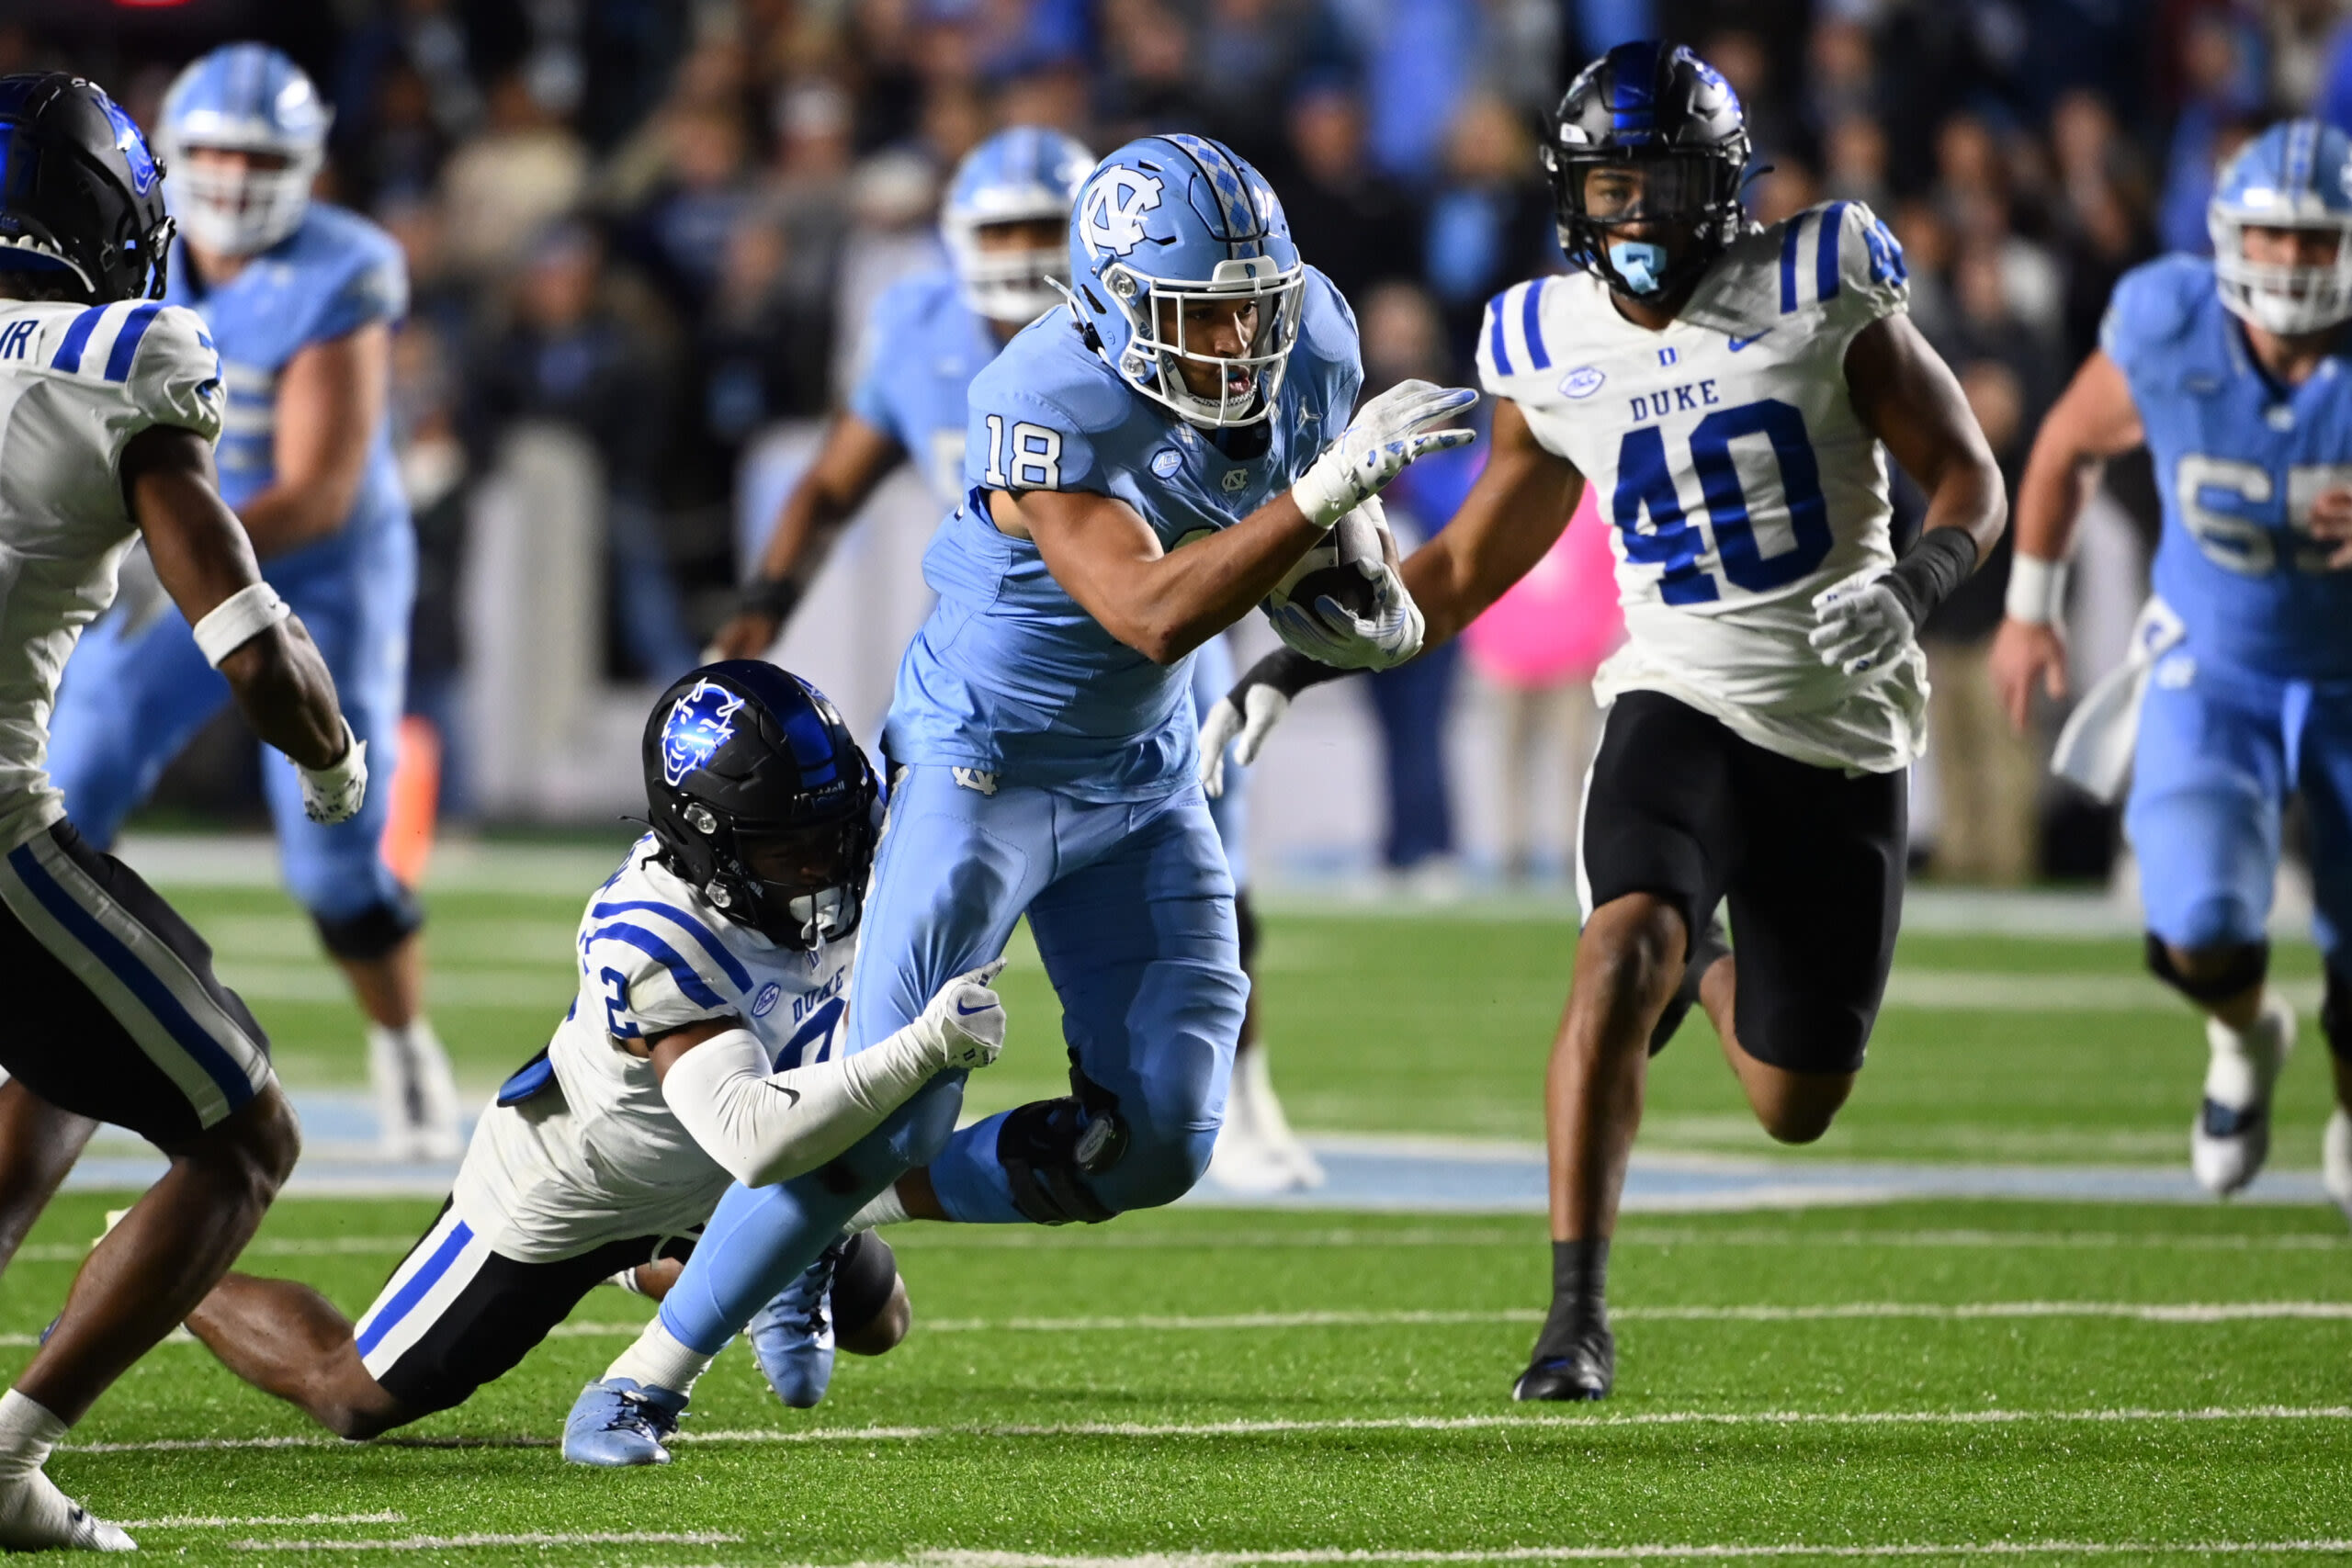 UNC football player listed as early top 10 prospect at position in 2025 NFL Draft